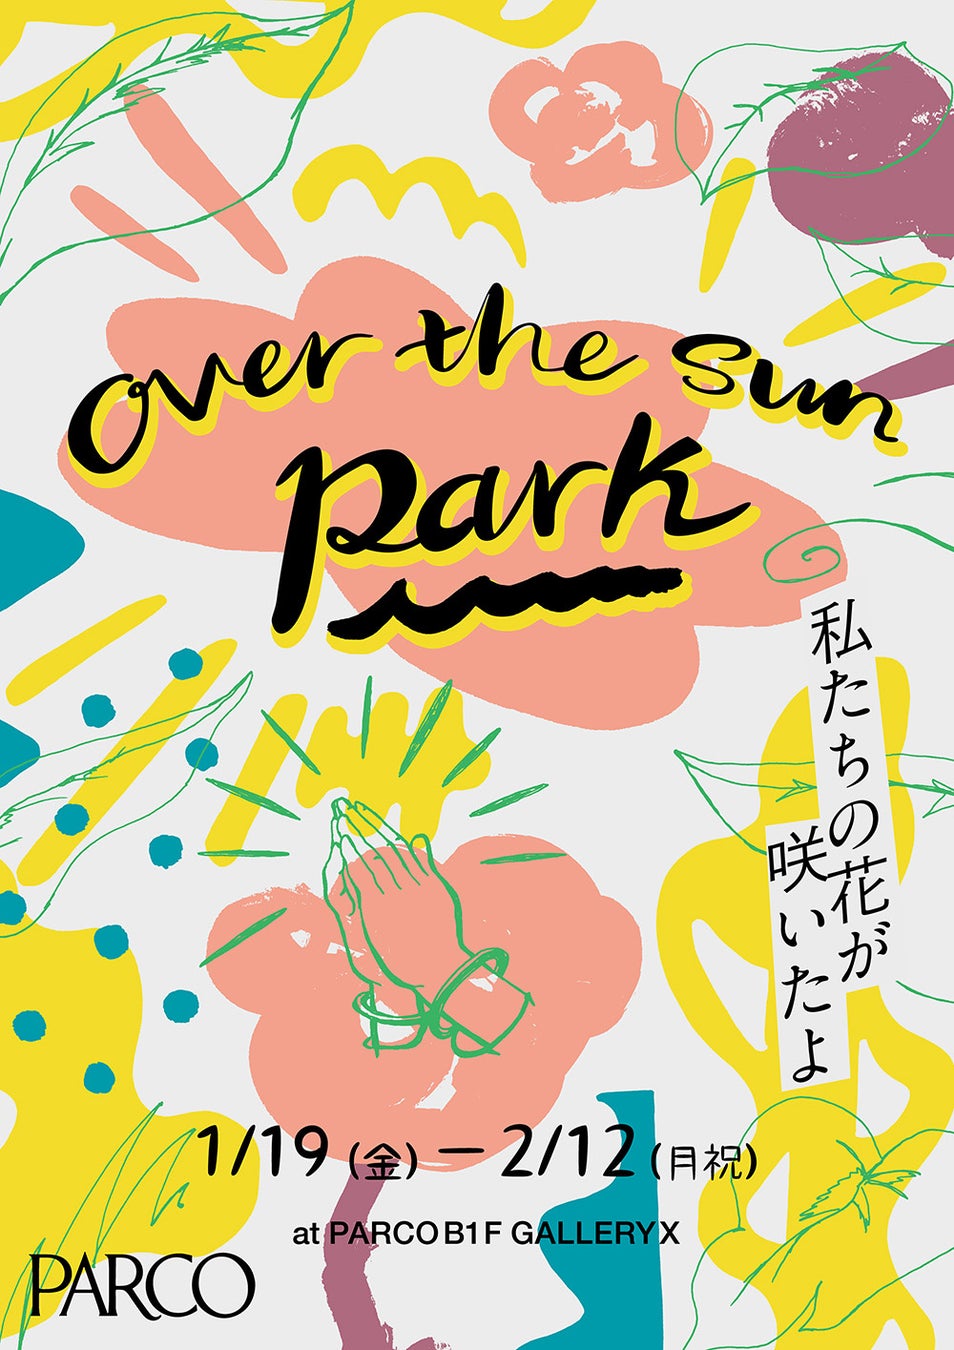 TBS Podcast「OVER THE SUN」展覧会好評につき、名古屋PARCOでの開催が決定！2月24日にはジェーン・スーと堀...